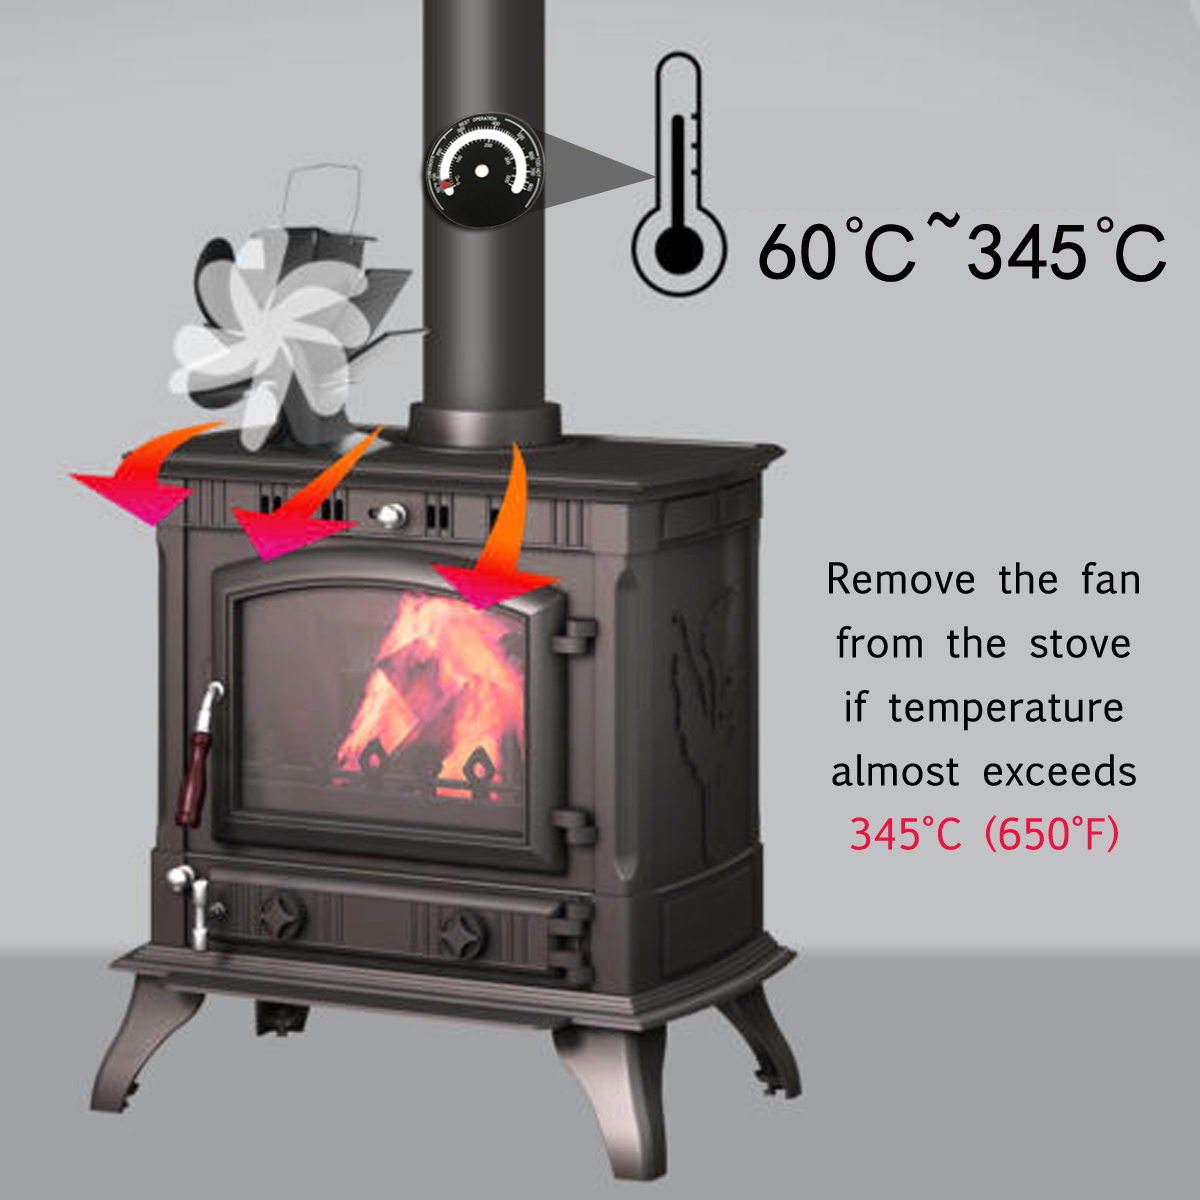 Creosote Fireplace Best Of Details About 2 Blade Heat Powered Stove Fan W thermometer for Wood Log Burning Burner Stove